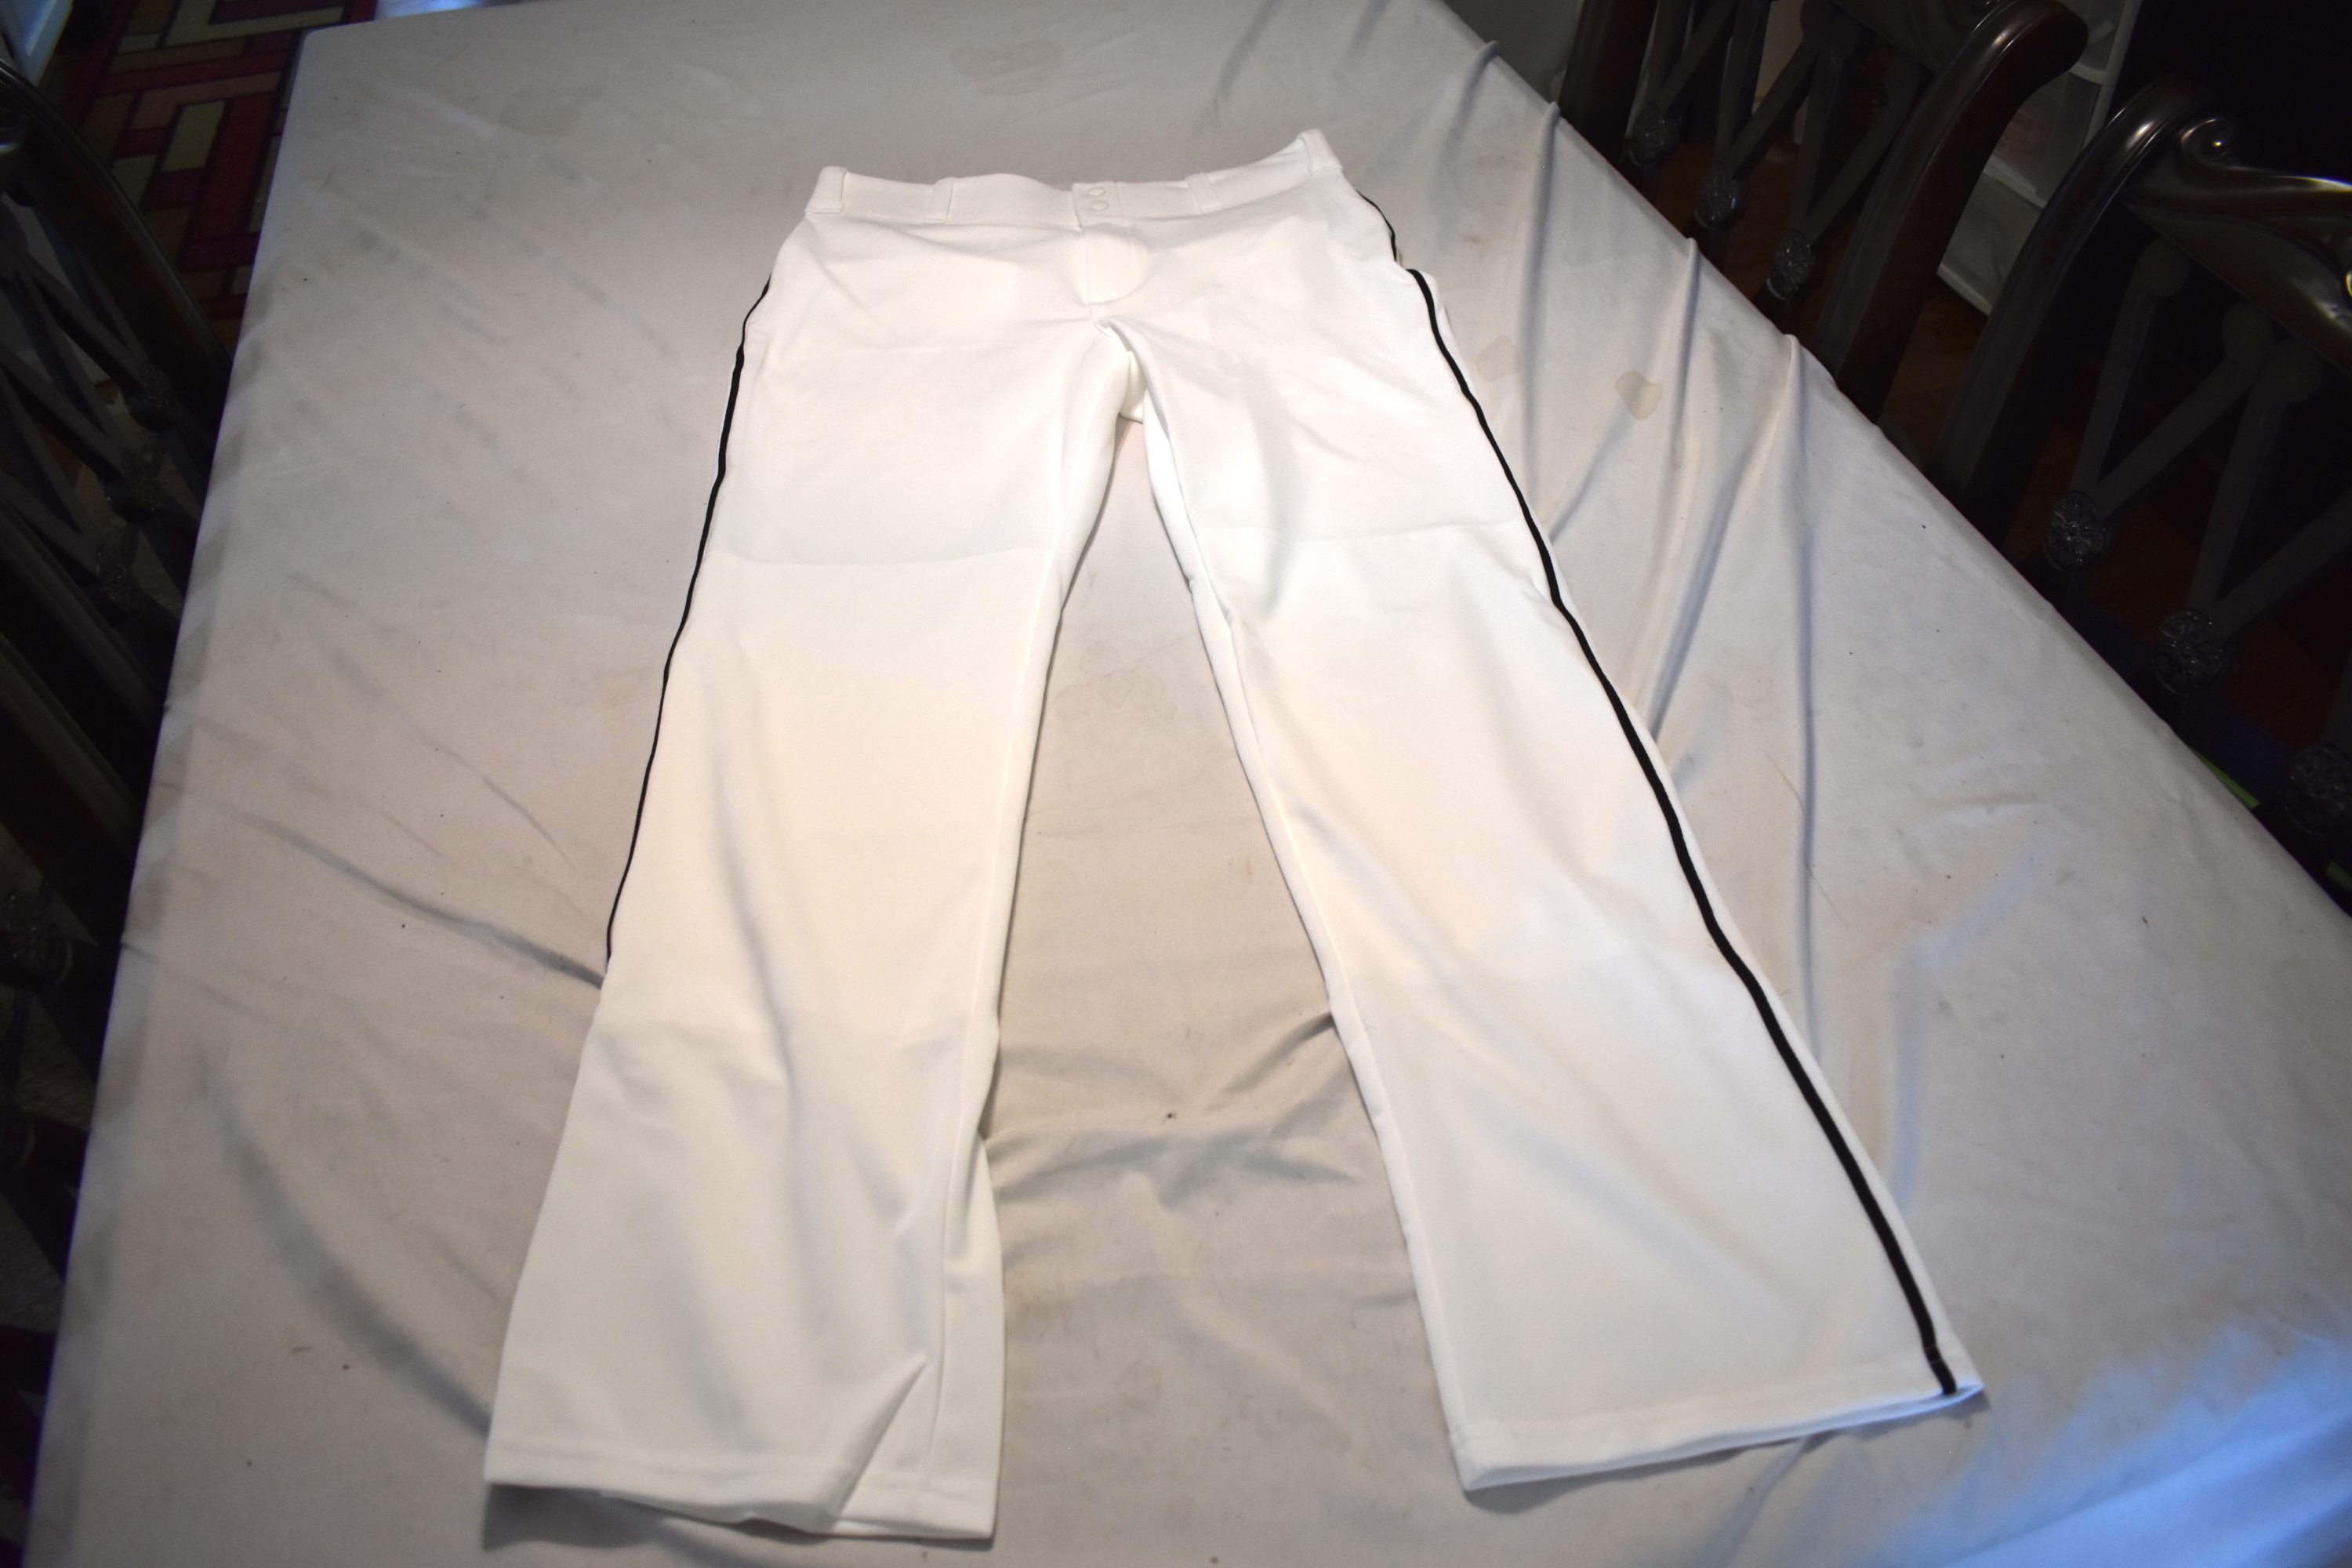 NEW - Alleson Athletics Piped Baseball Pants, White/Black, Adult Large